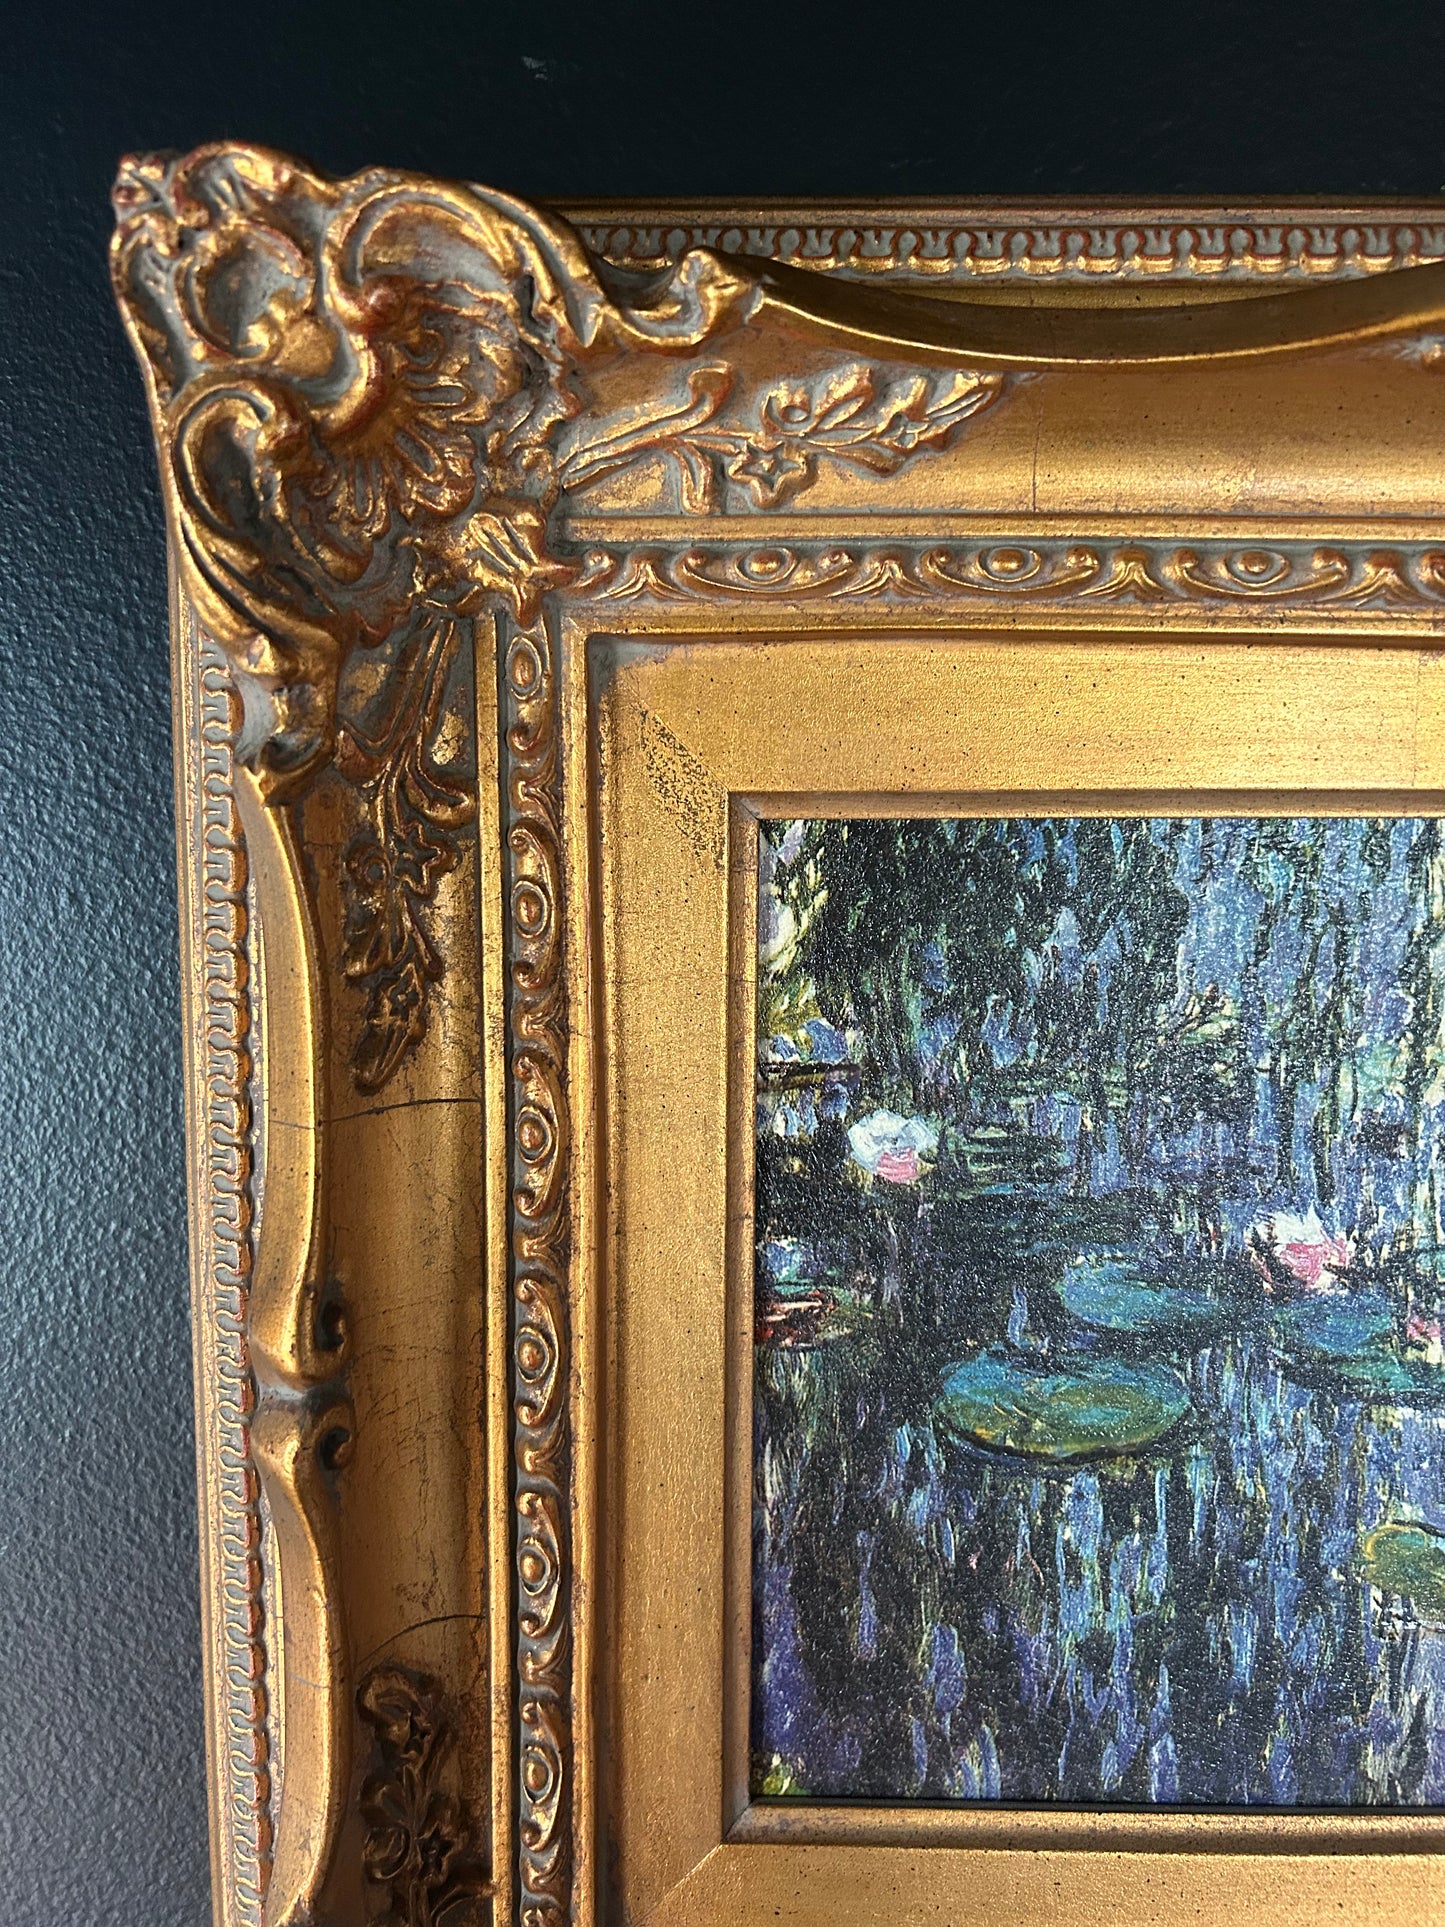 Monet 'Water Lilies' reproduction with gilded frame